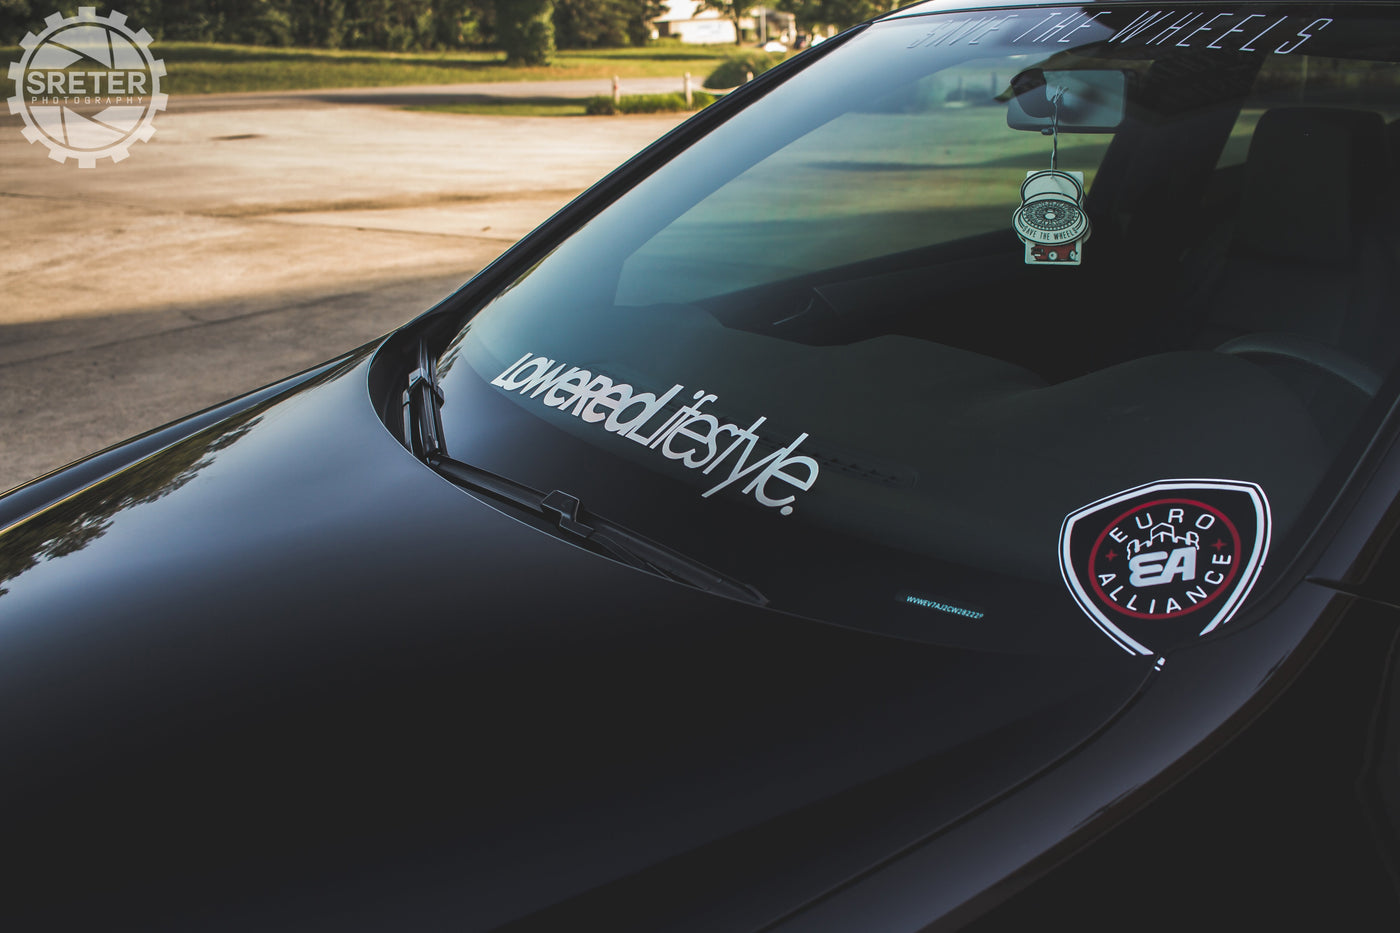 Lowered Lifestyle OG Windshield Banner - 30" - Lowered Lifestyle